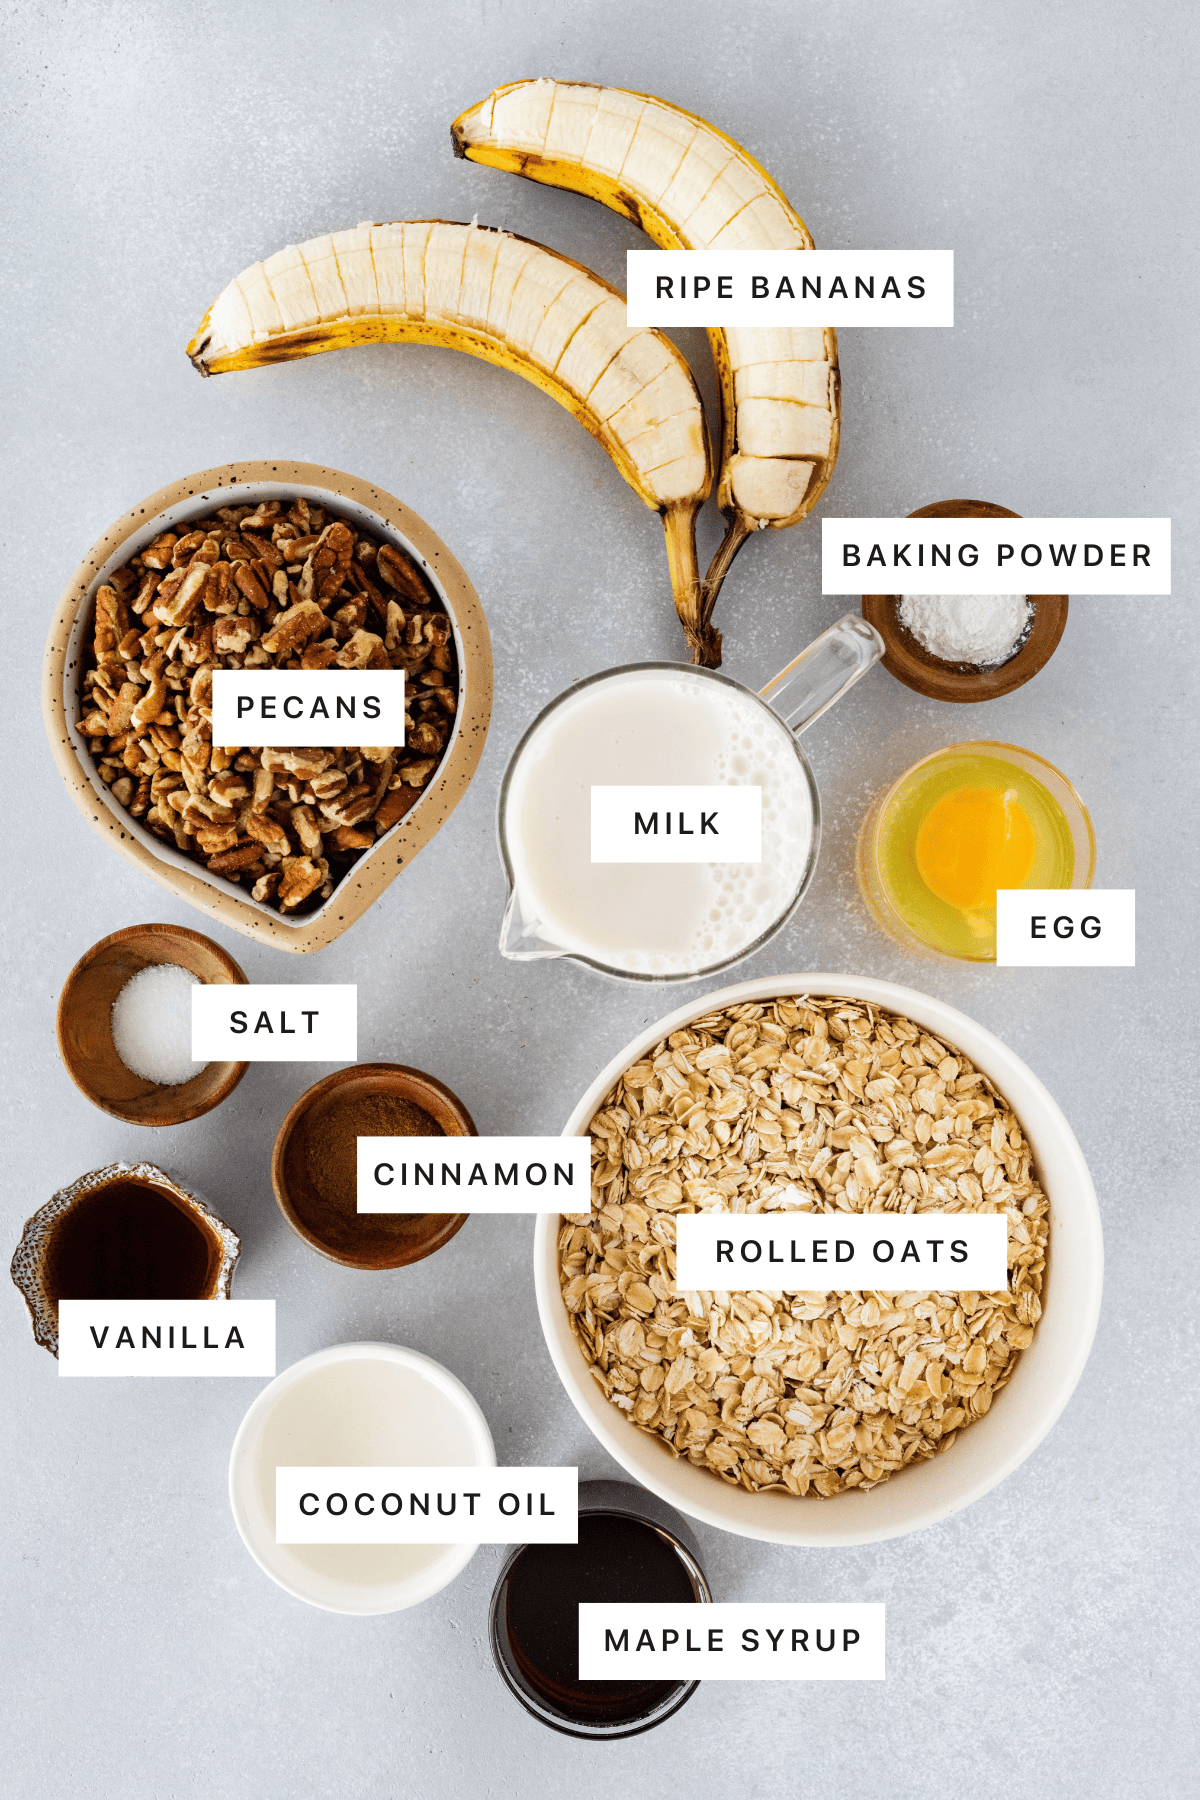 Ingredients for baked oatmeal: bananas, pecans, milk, egg, baking powder, rolled oats, maple syrup, coconut oil, cinnamon, vanilla and salt.